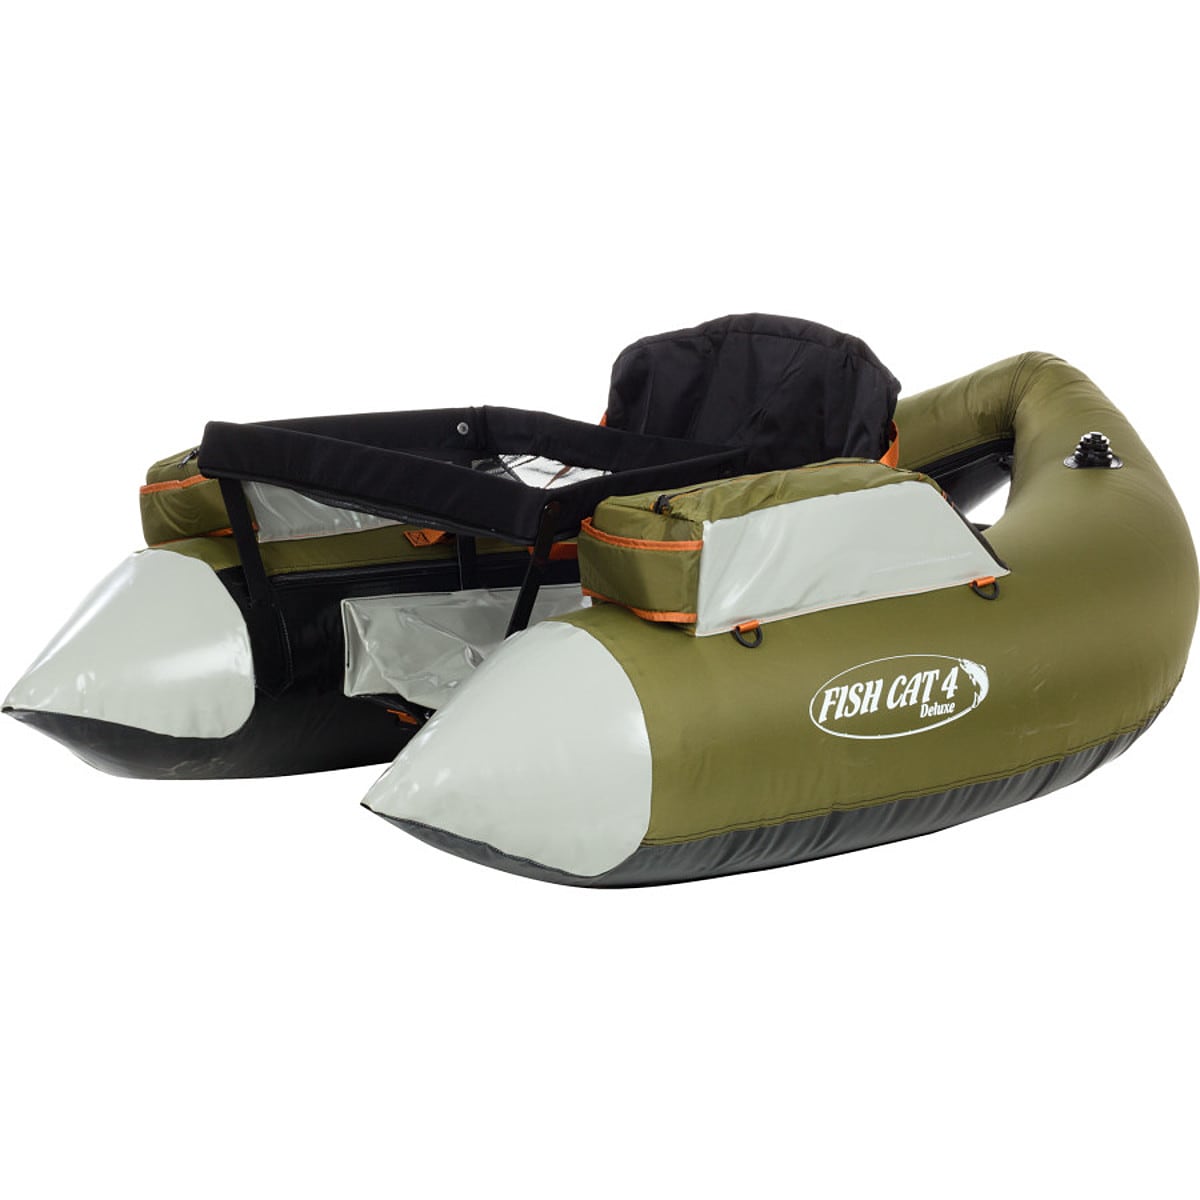 Fish Cat 4 Deluxe - LCS Float Tube - Fishing